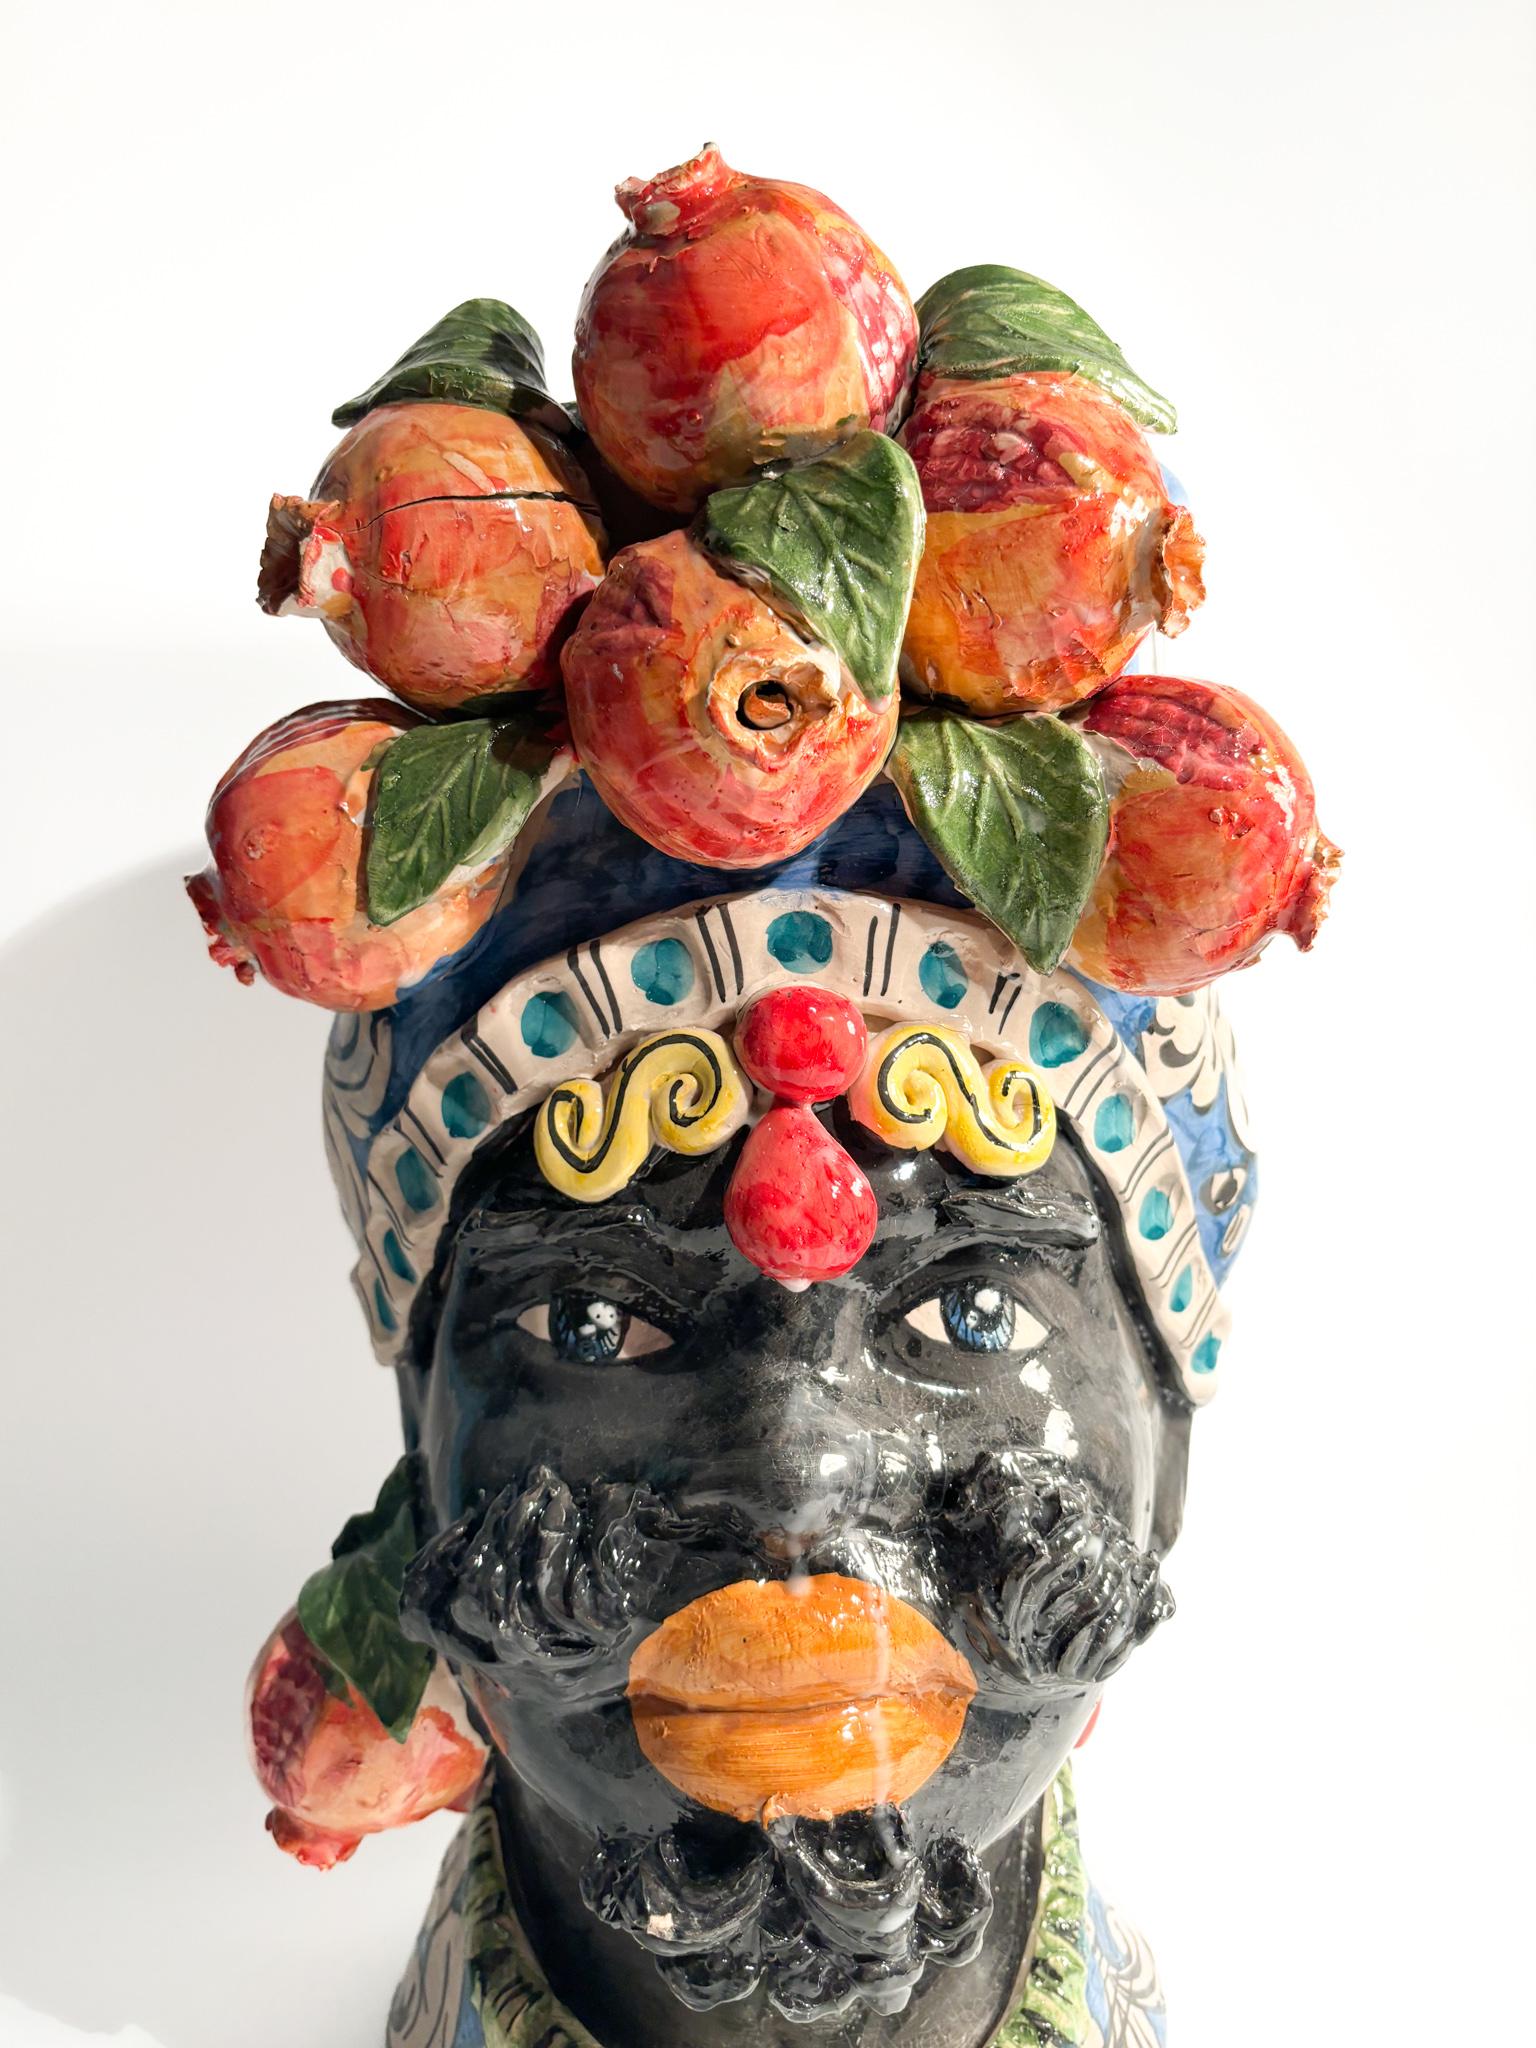 Moor's head of Caltagirone of a male figure with pomegranates, made by Ceramiche Germano in the 1990s

Ø 28 cm h 47 cm

Ceramiche Germano is a ceramic company based in Caltagirone, Sicily, Italy. The company was founded in 1967 by Sebastiano Germano